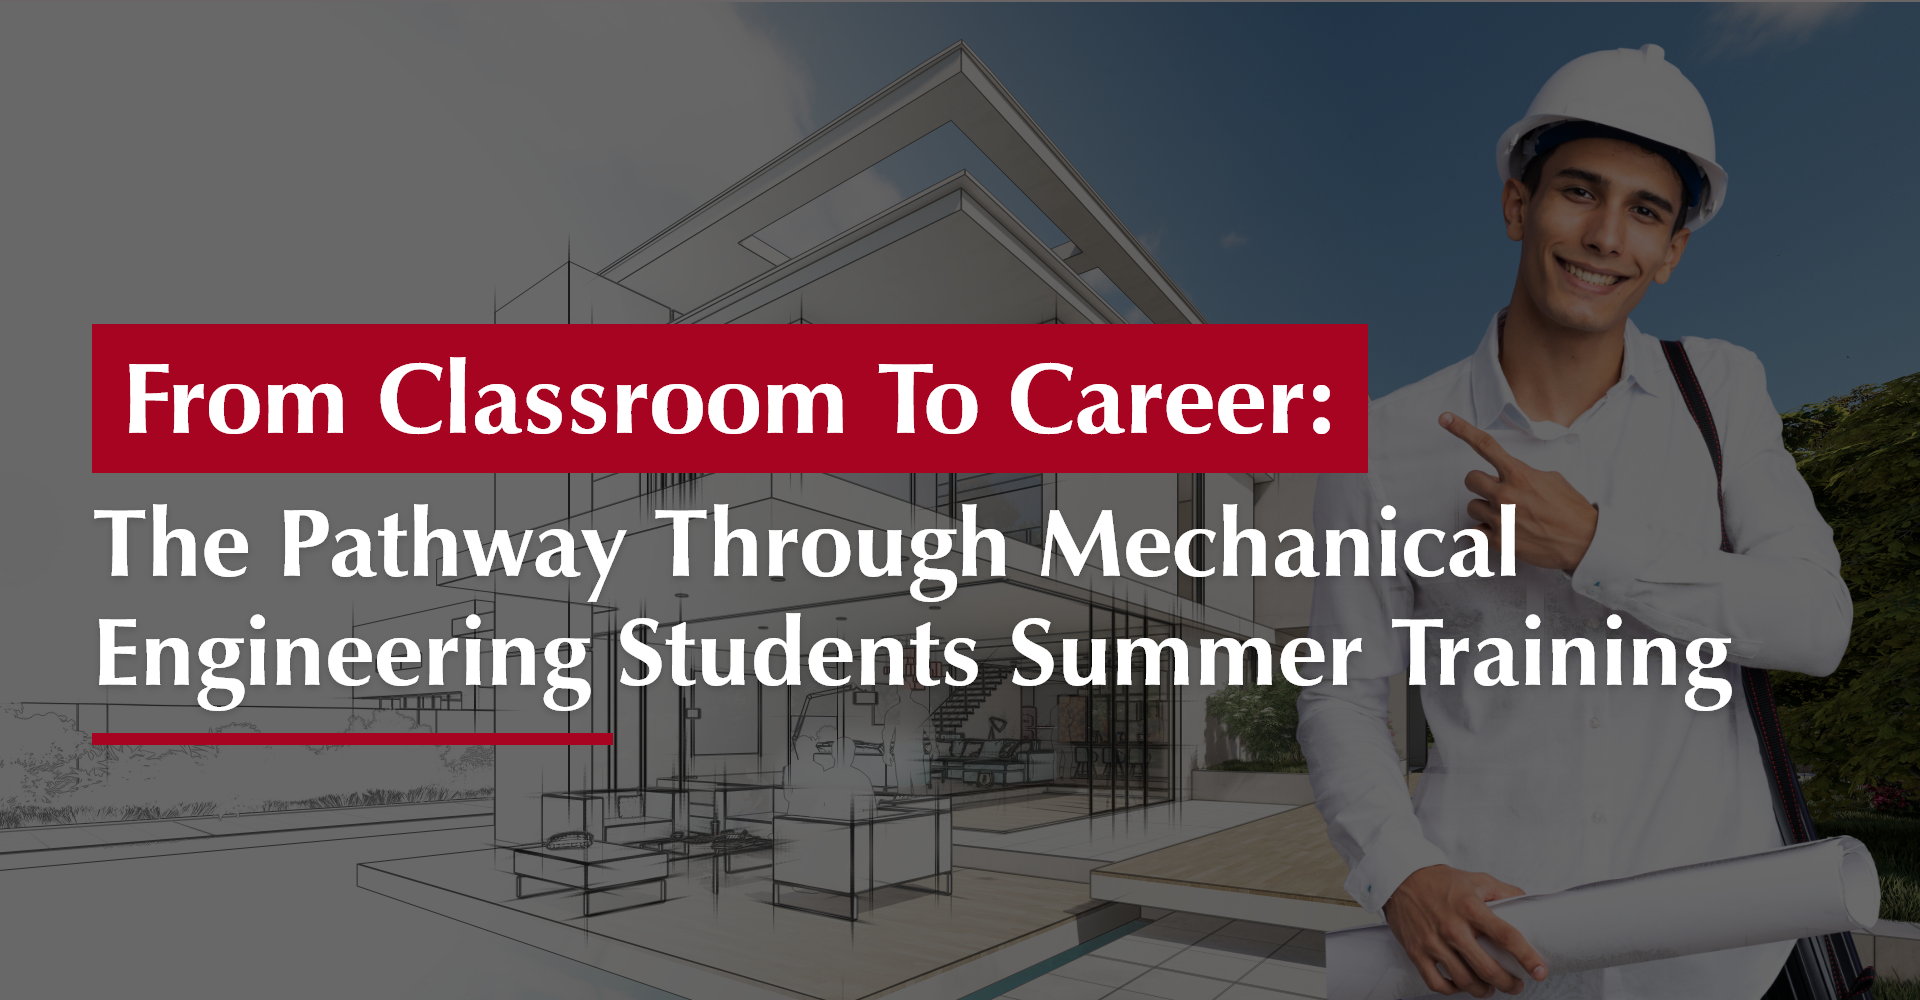 From Classroom to Career: The Pathway Through Mechanical Engineering Students Summer Training